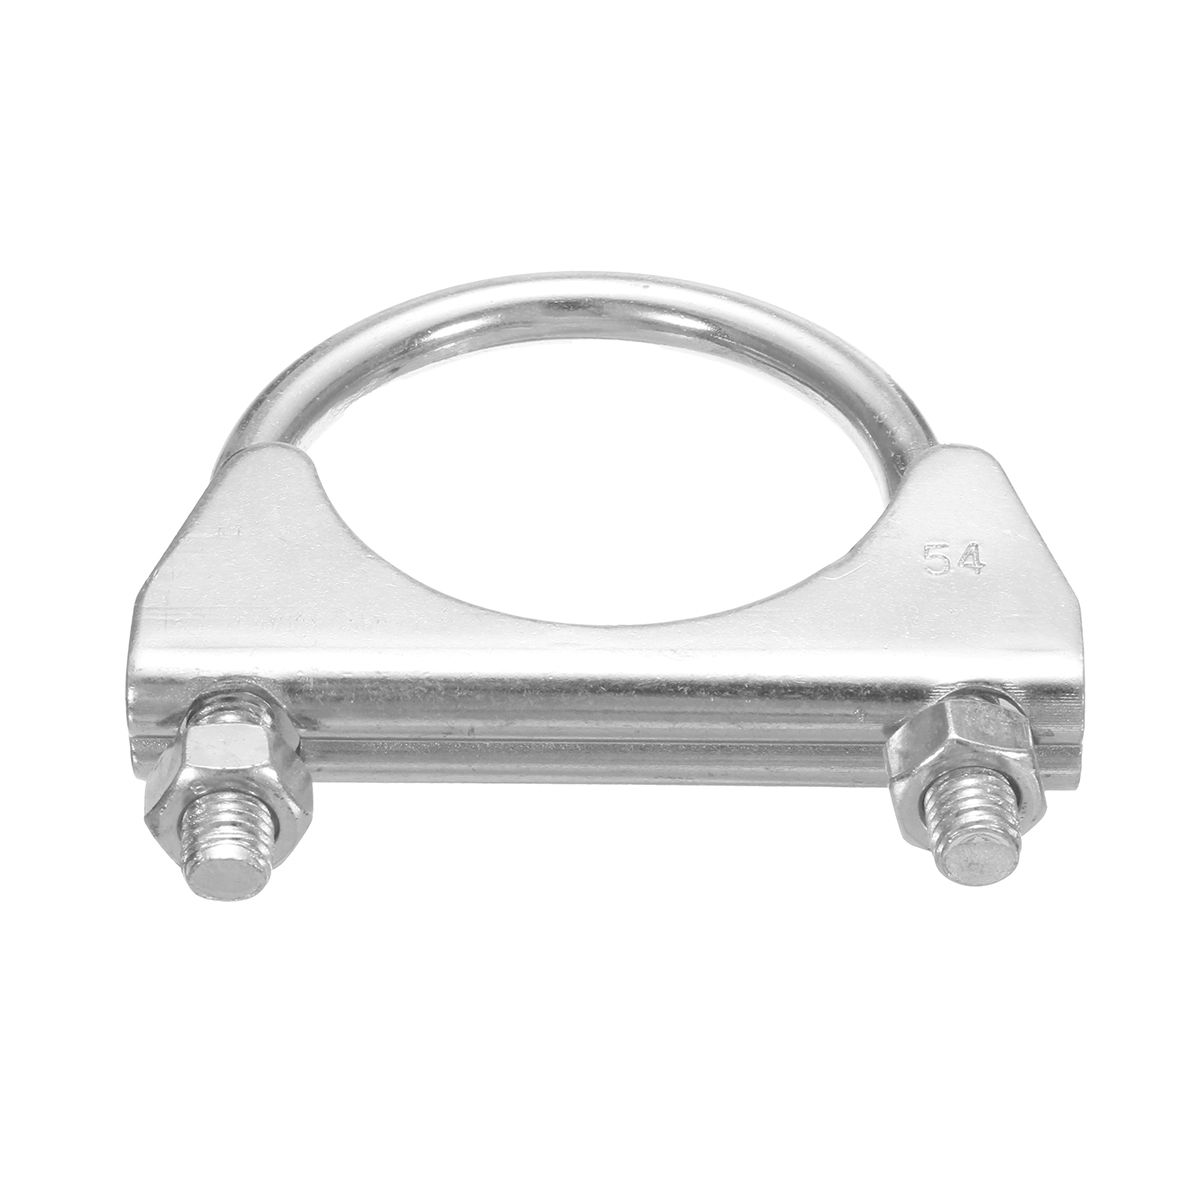 2-Inch-x-8-Inch-Car-Tools-Exhaust-Clamp-On-Flexi-Tube-Joint-Flexible-Pipe-Repairtools-1203316